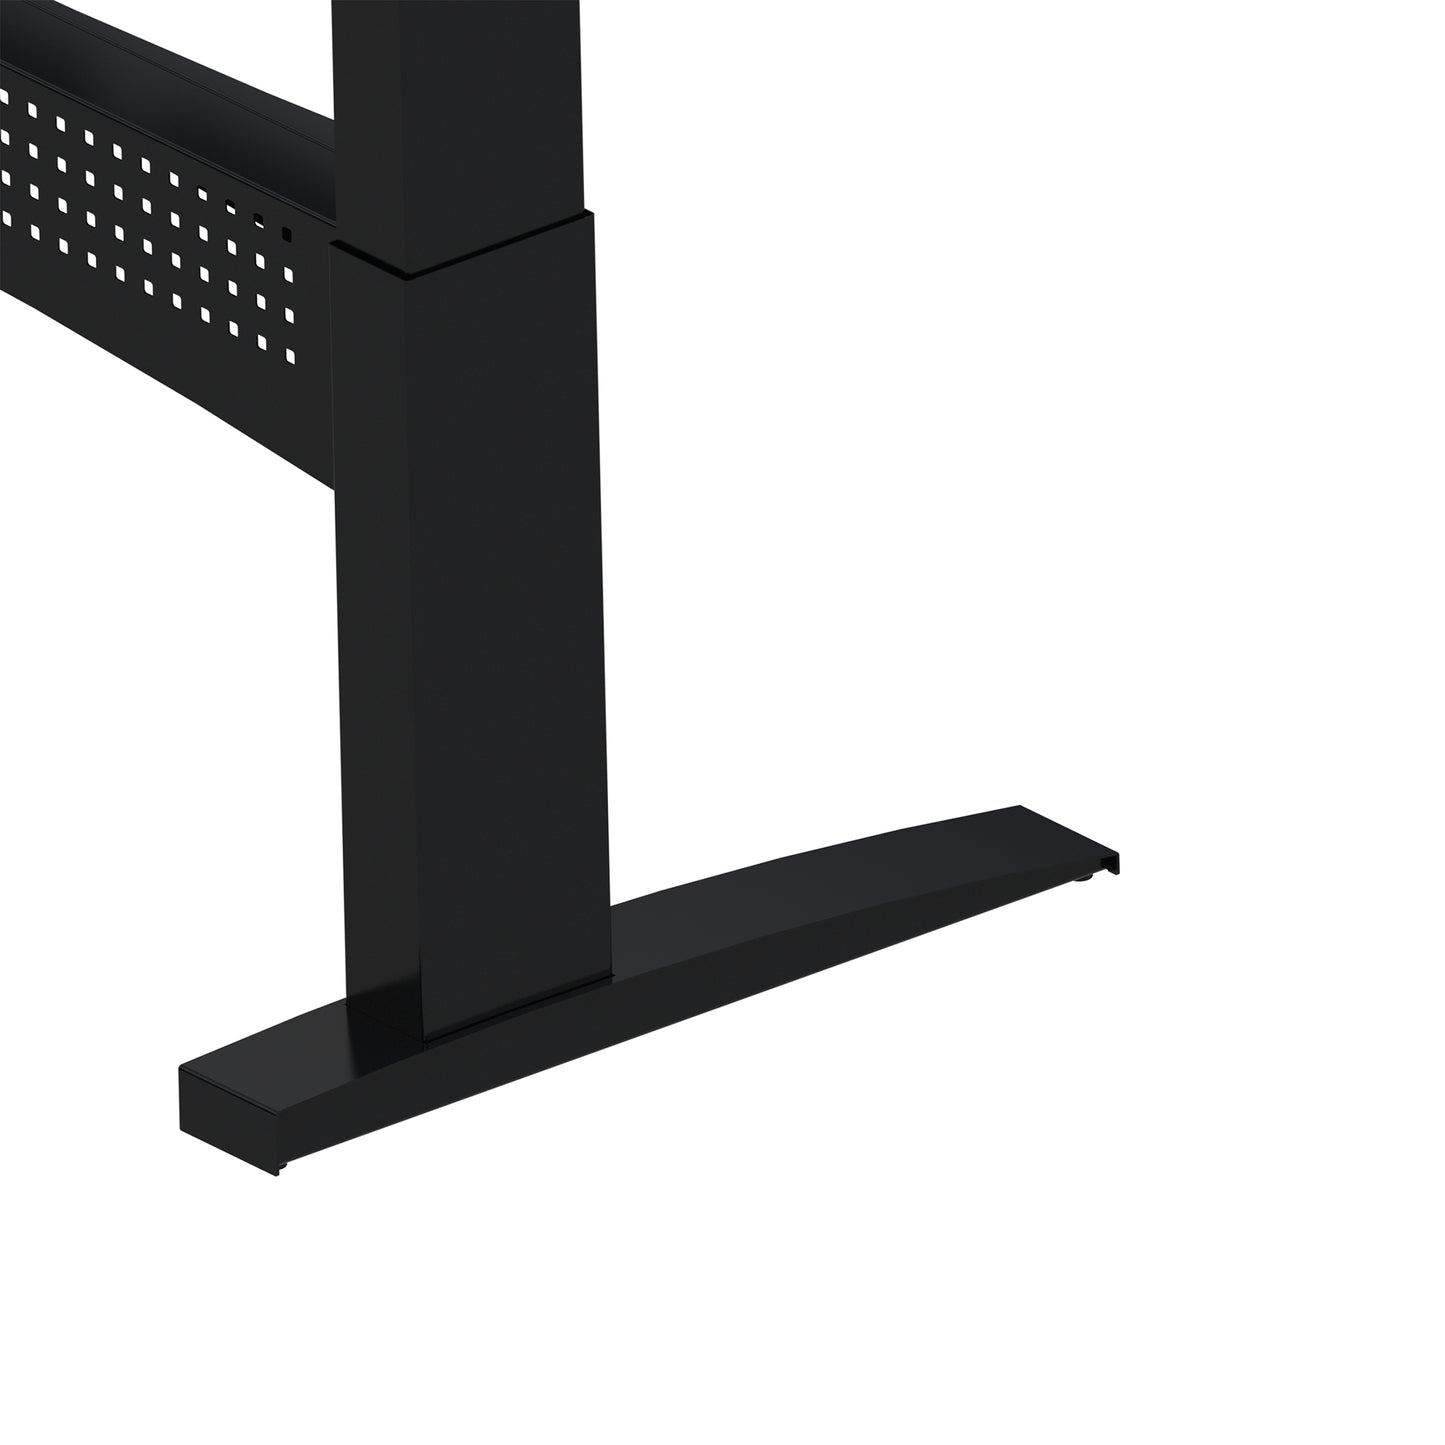 ConSet 501-11 L-Shaped Height Adjustable Sit Stand Desk